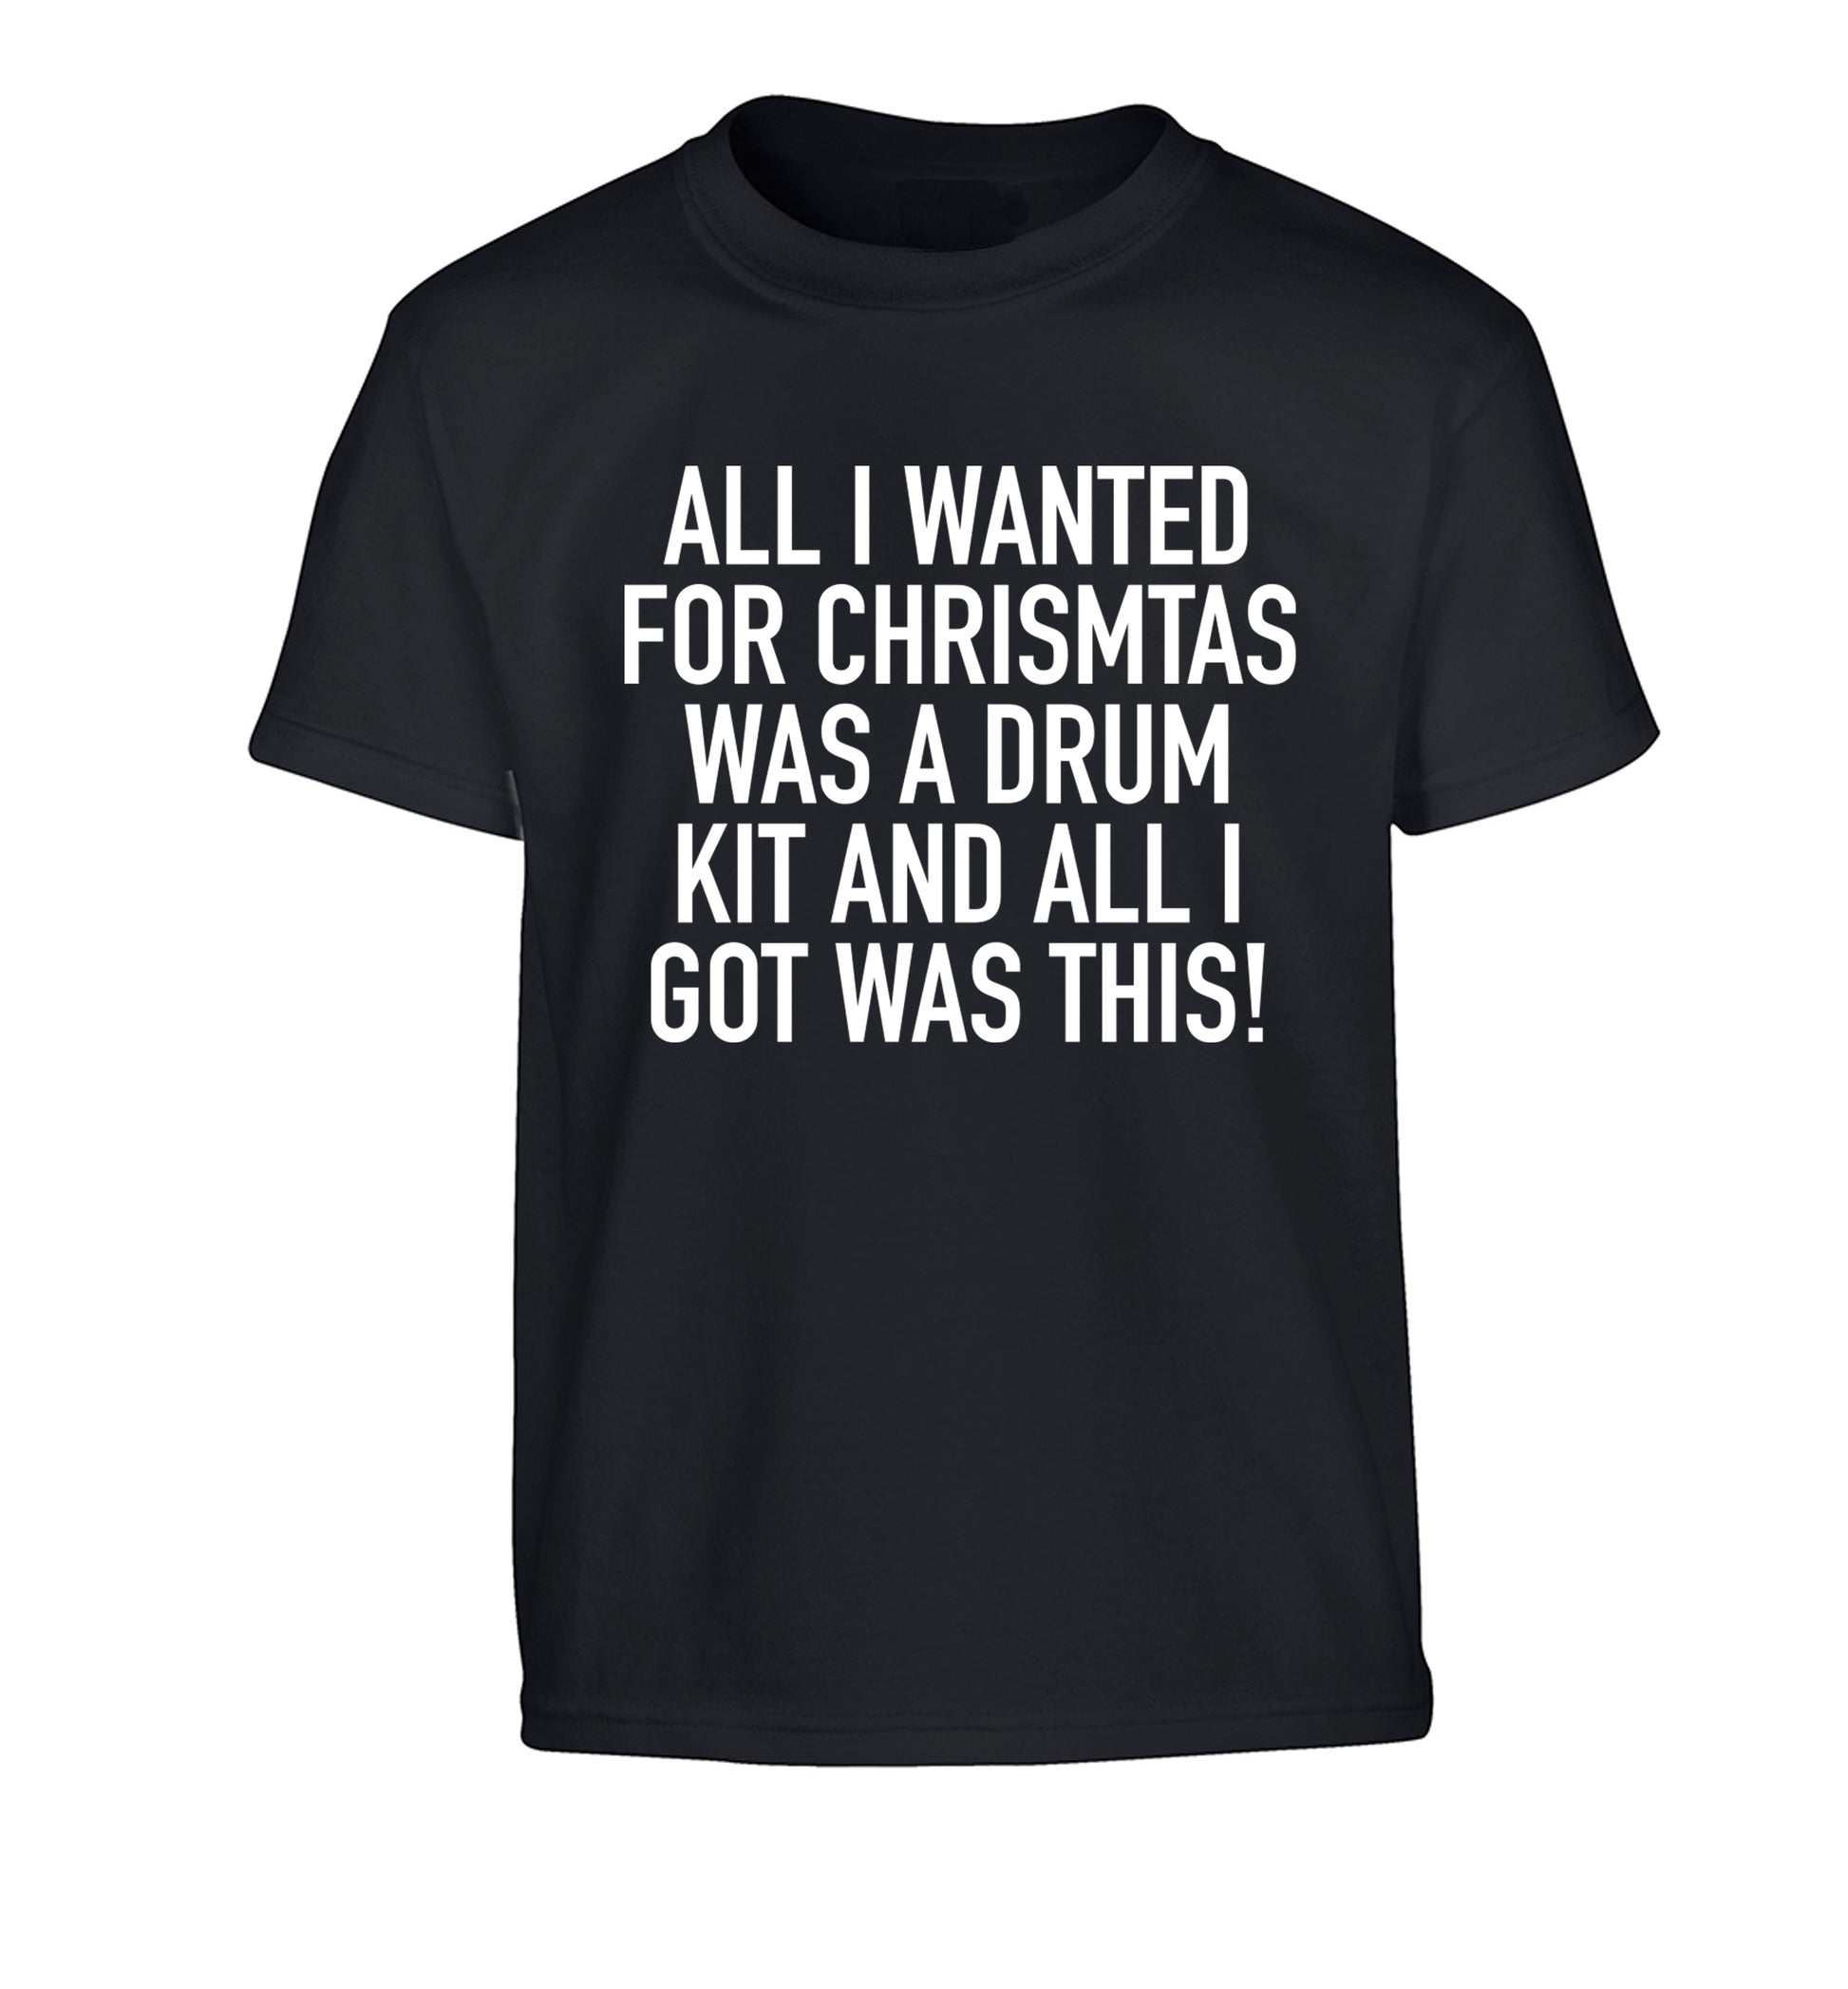 All I wanted for Christmas was a drum kit and all I got was this! Children's black Tshirt 12-14 Years